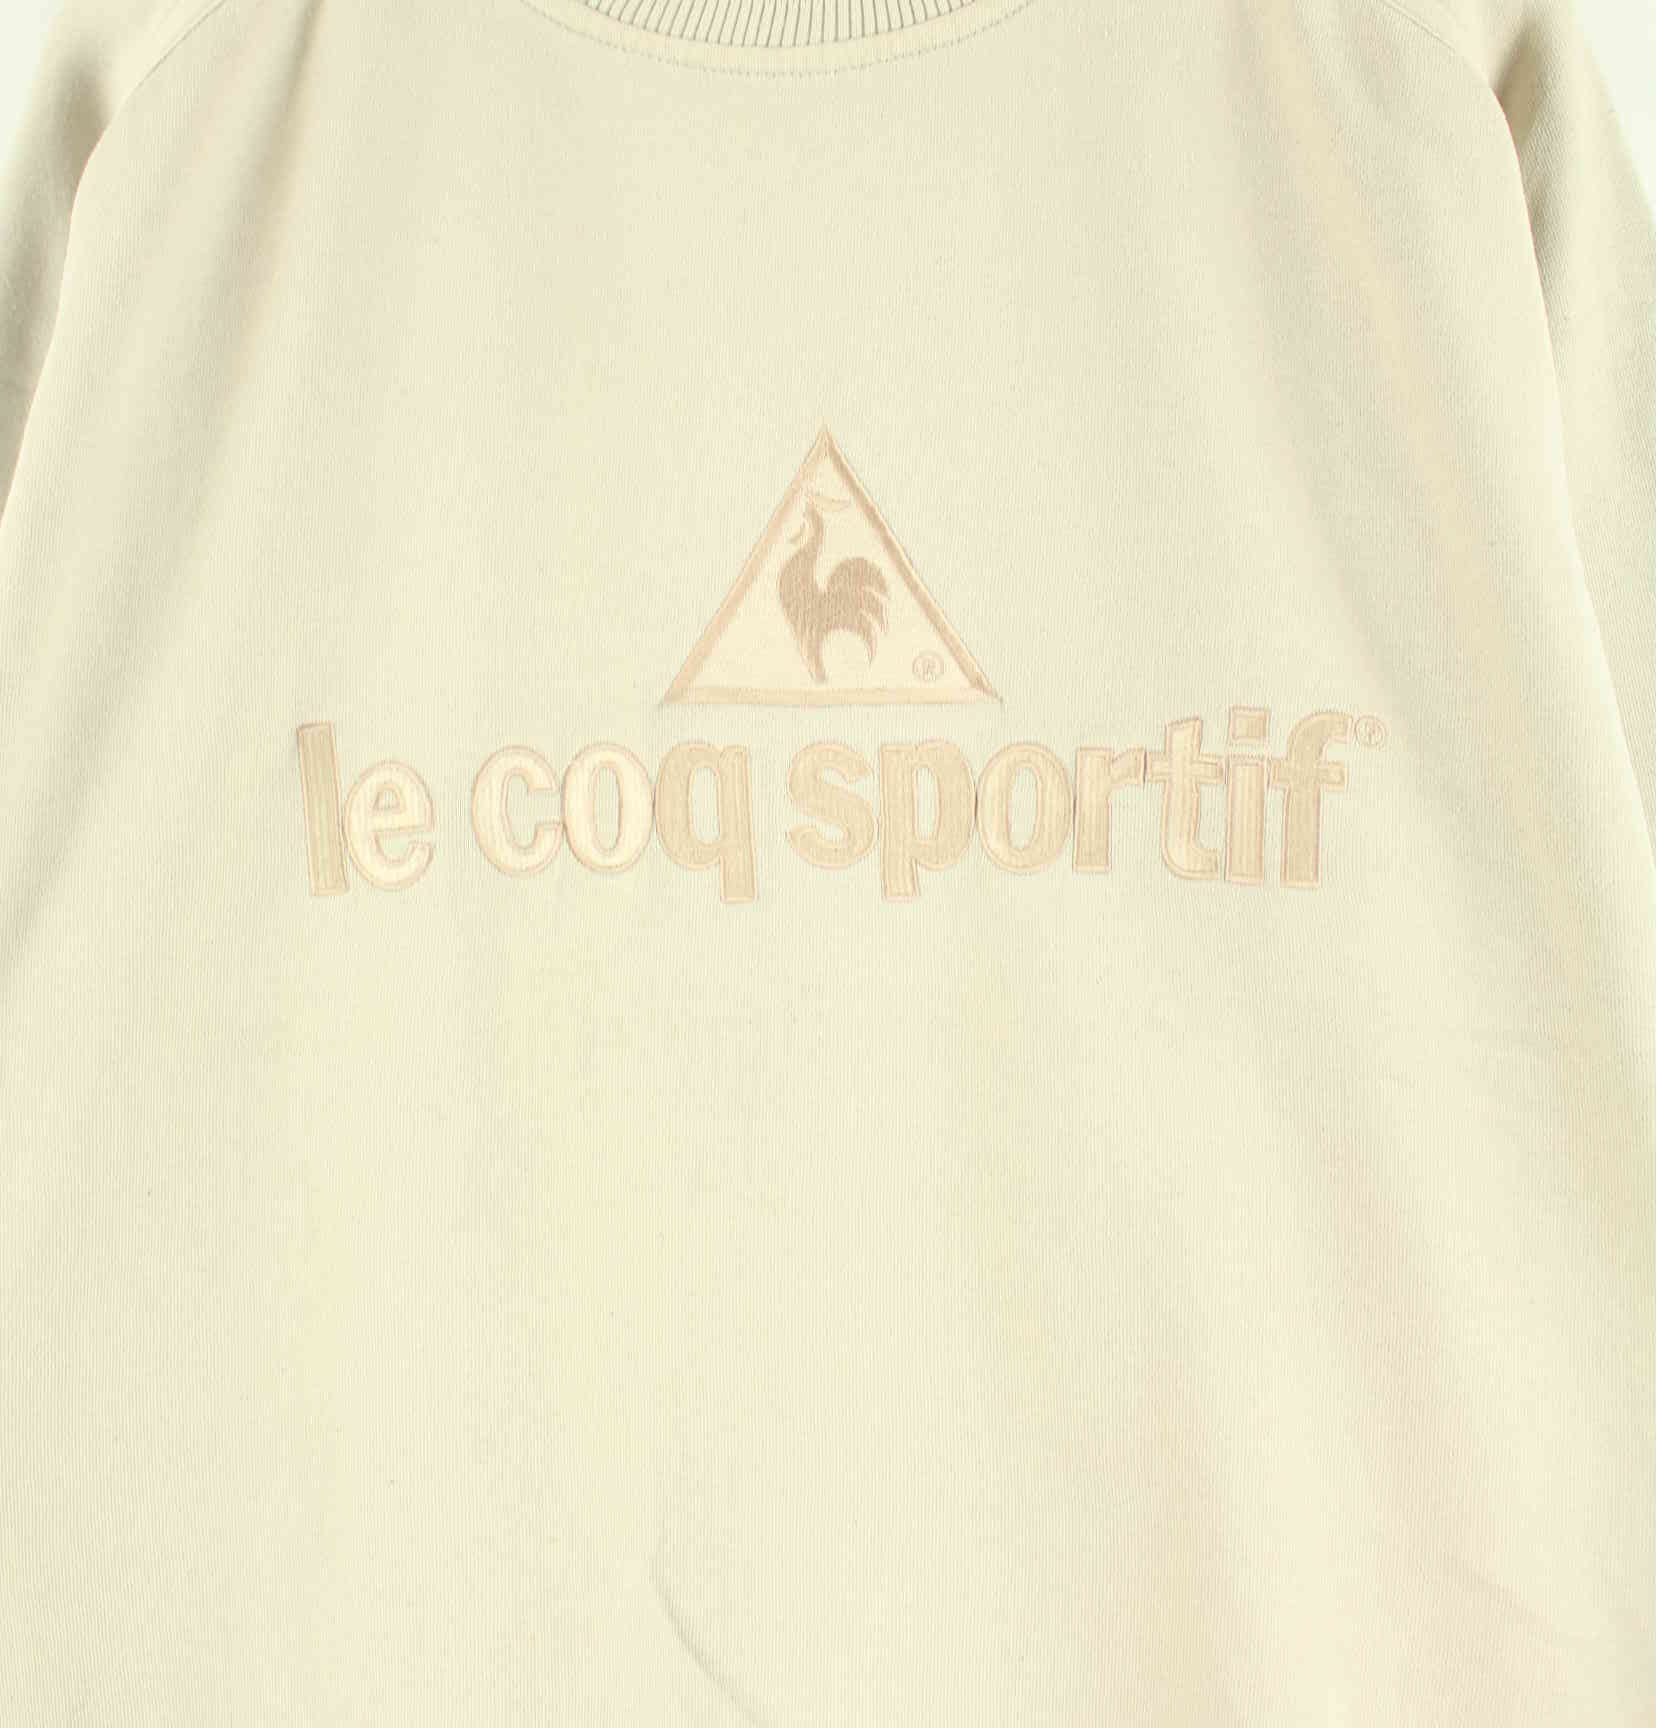 Le Coq Sportif 90s Vintage Embroidered Sweater Beige L (detail image 1)